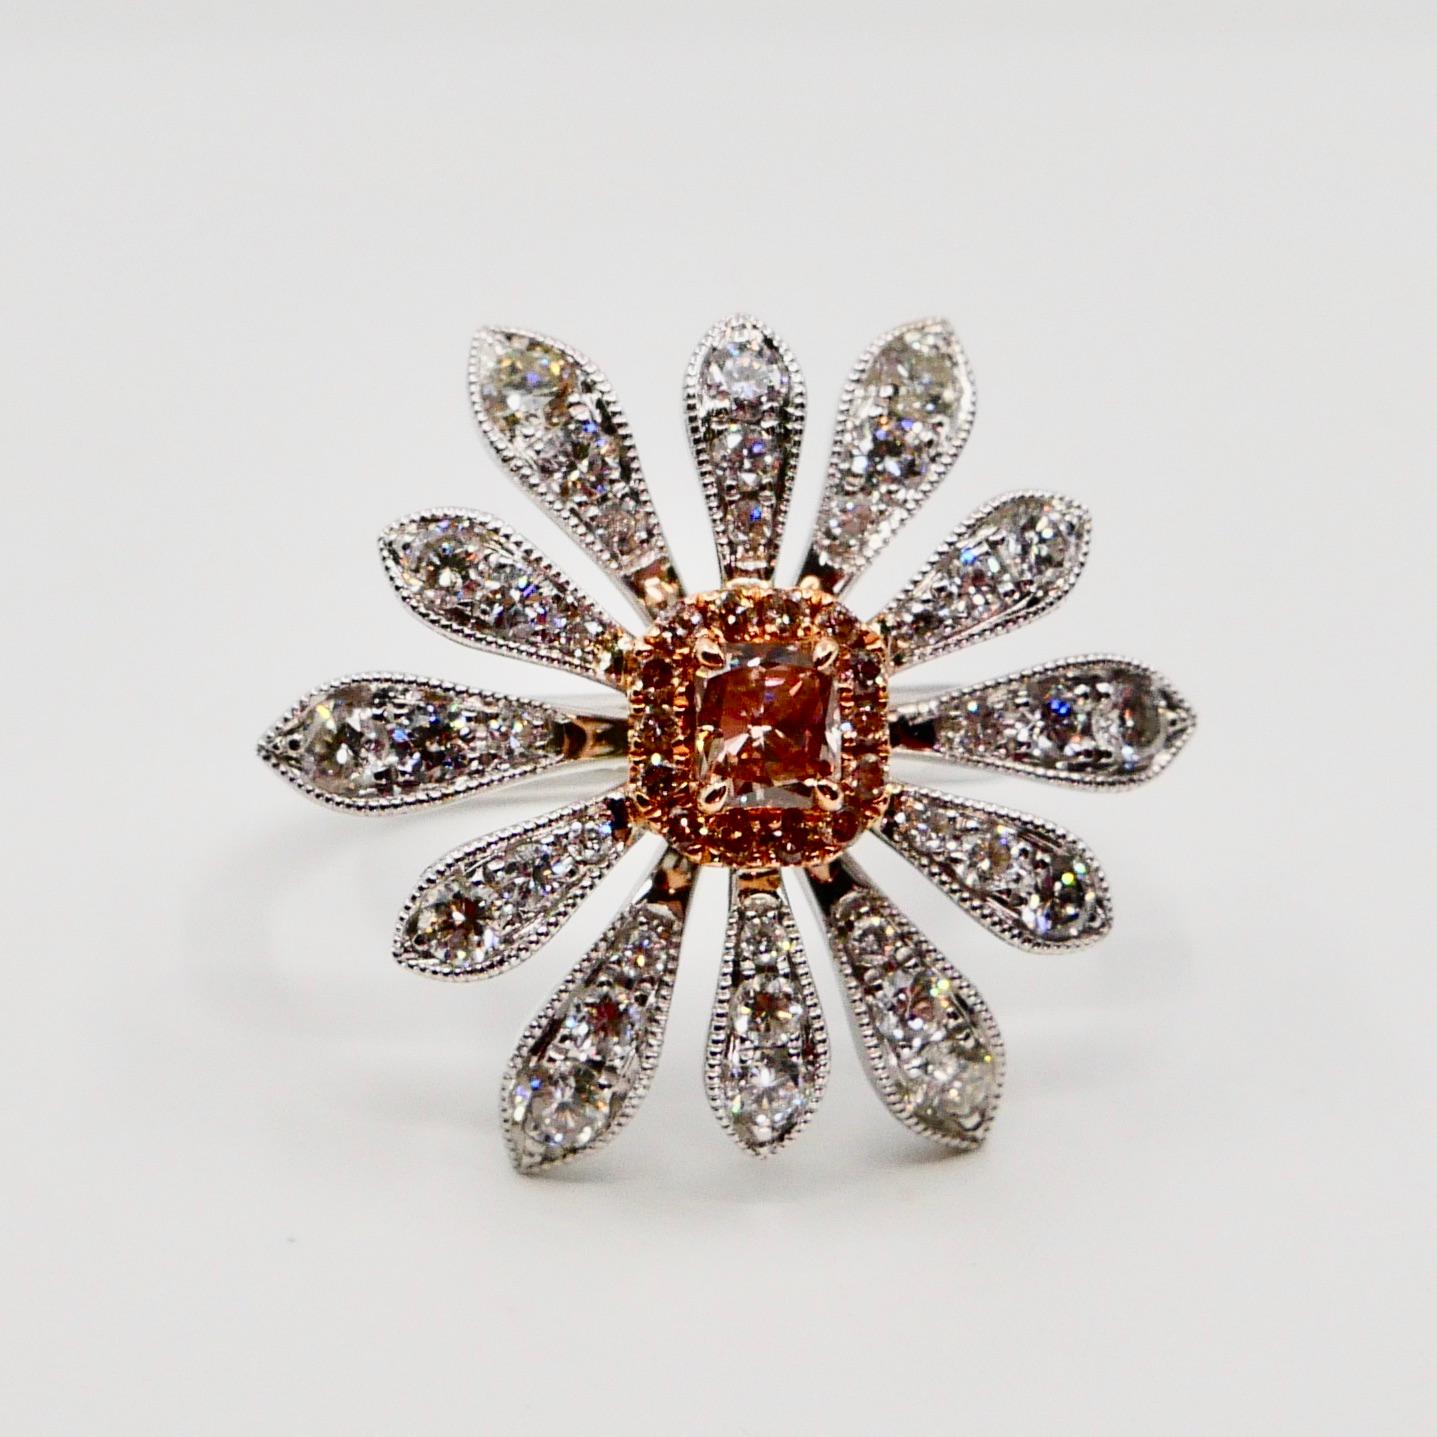 0.26 Carat Natural Fancy Pink Diamond and White Diamond Flower Cocktail Ring For Sale 4